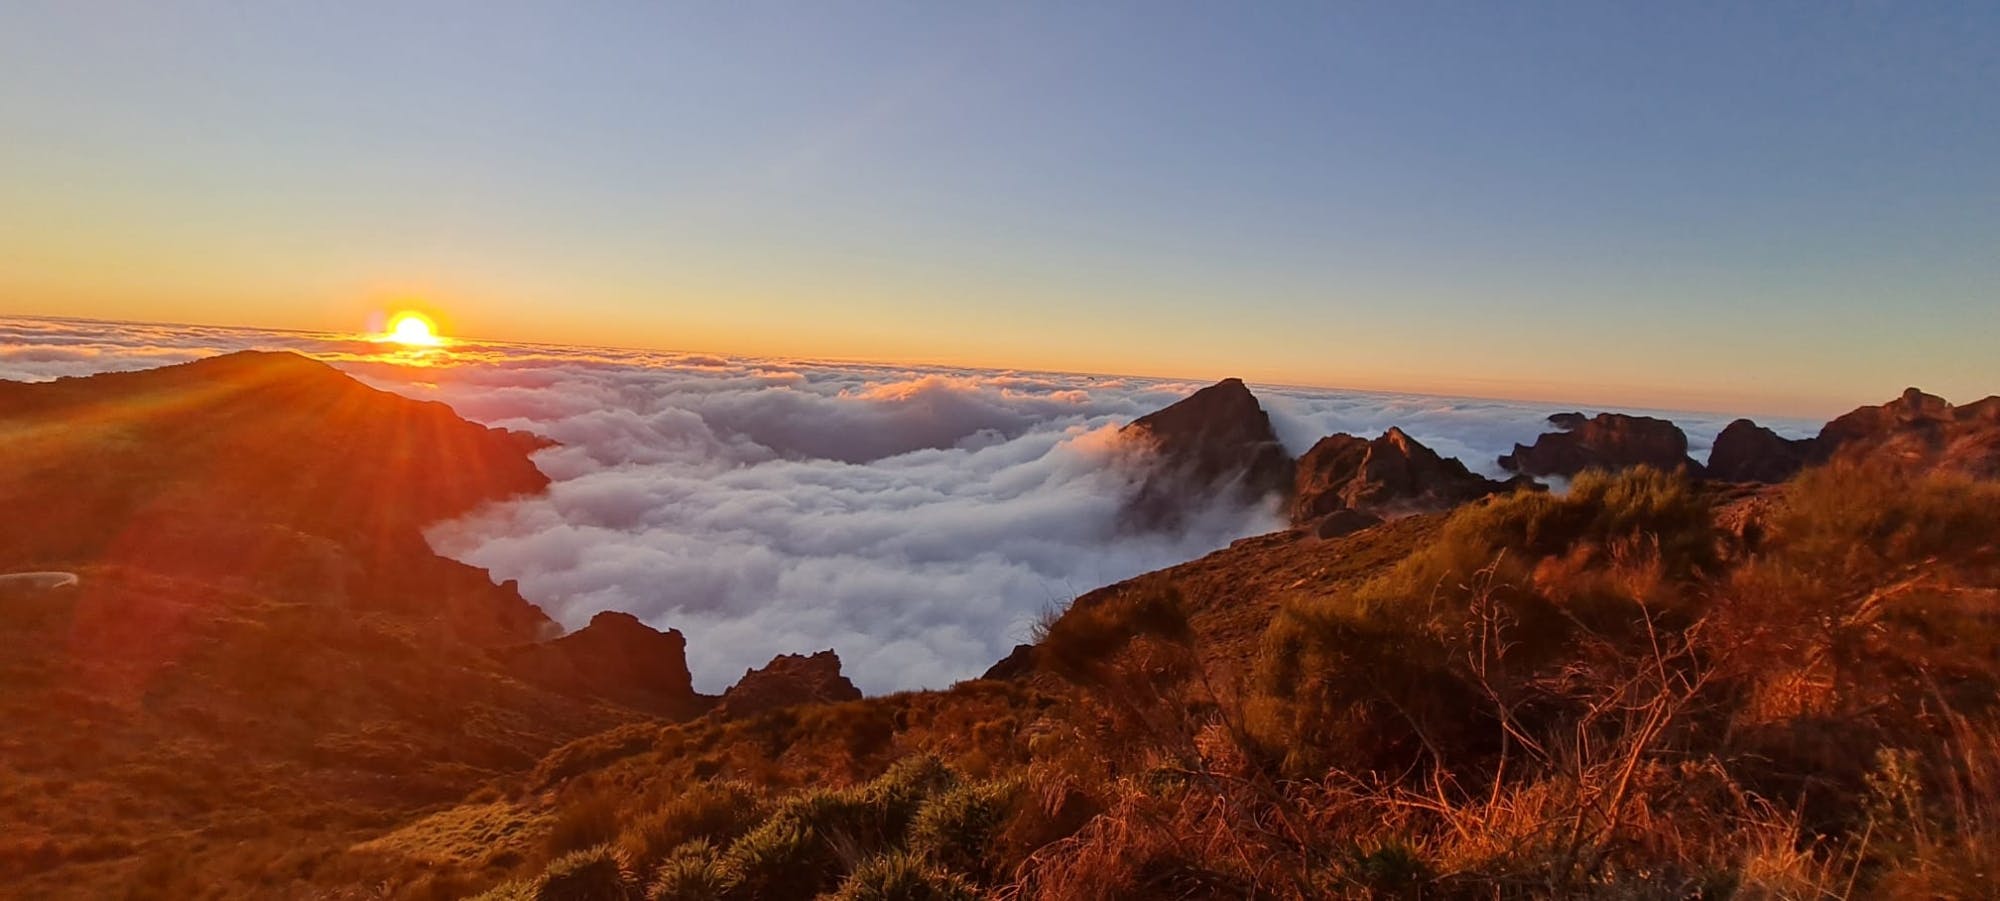 Pico do Arieiro sunset tour with food and drinks from Funchal Musement